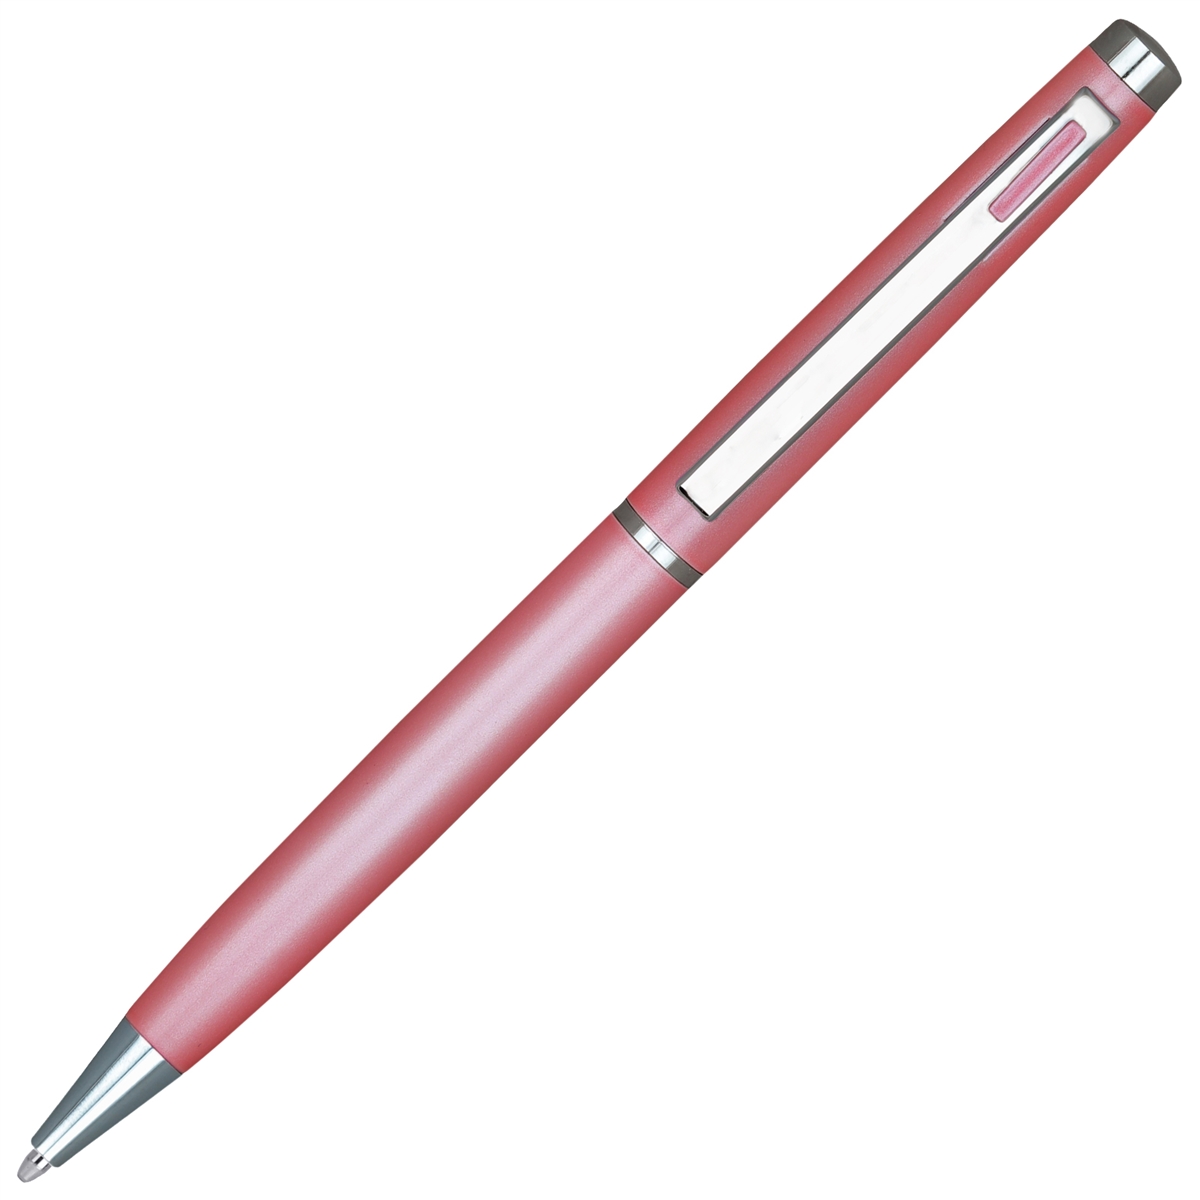 4G Ball Pen – Pink with Pink Accents by Lanier Pens